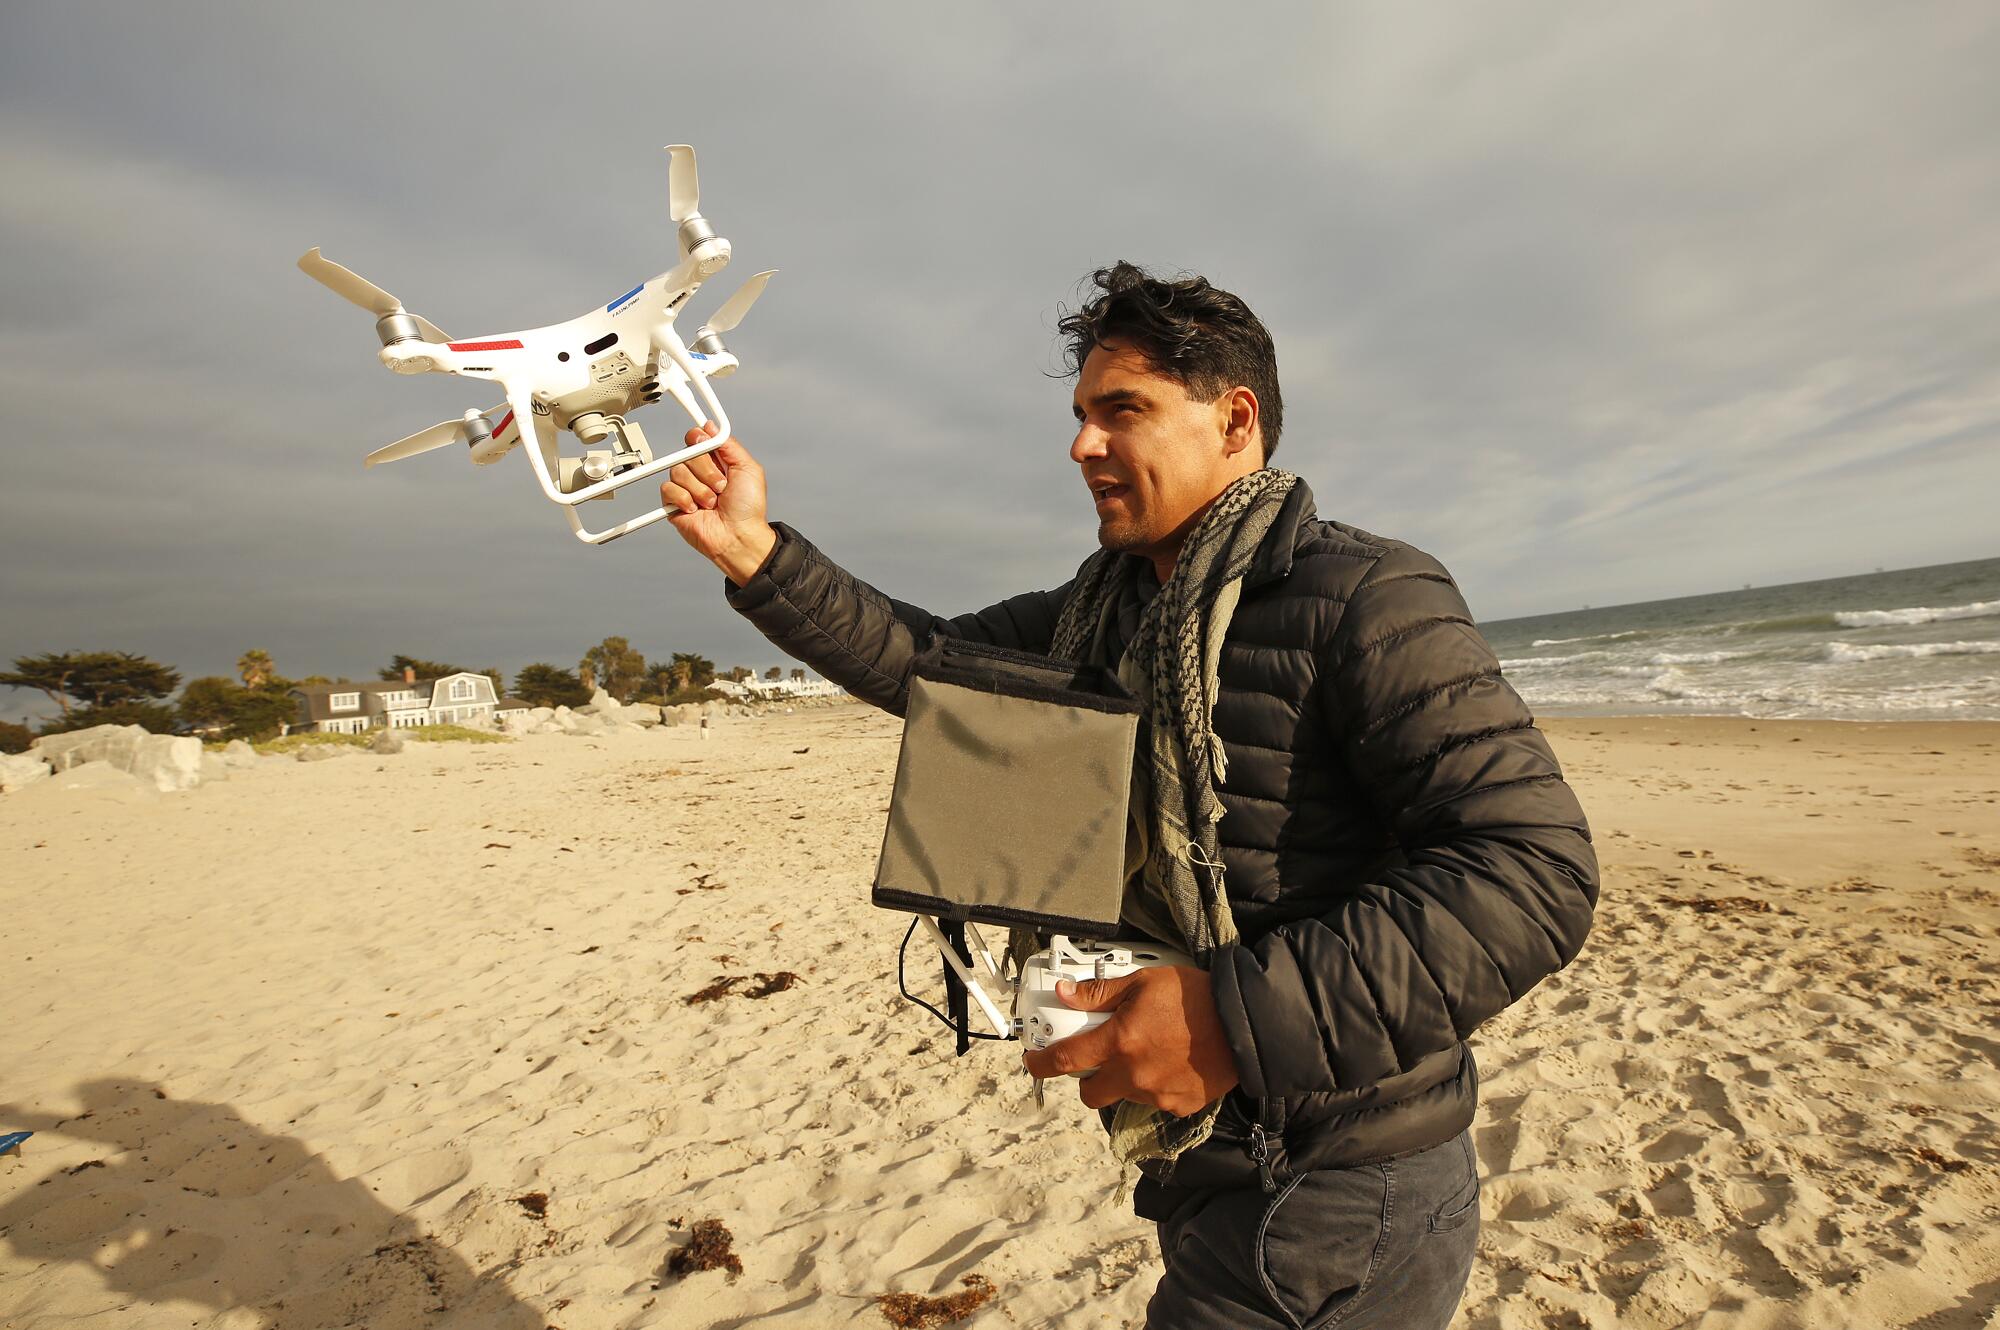 Drone photographer Carlos Gauna grabs his drone to avoid a sand landing